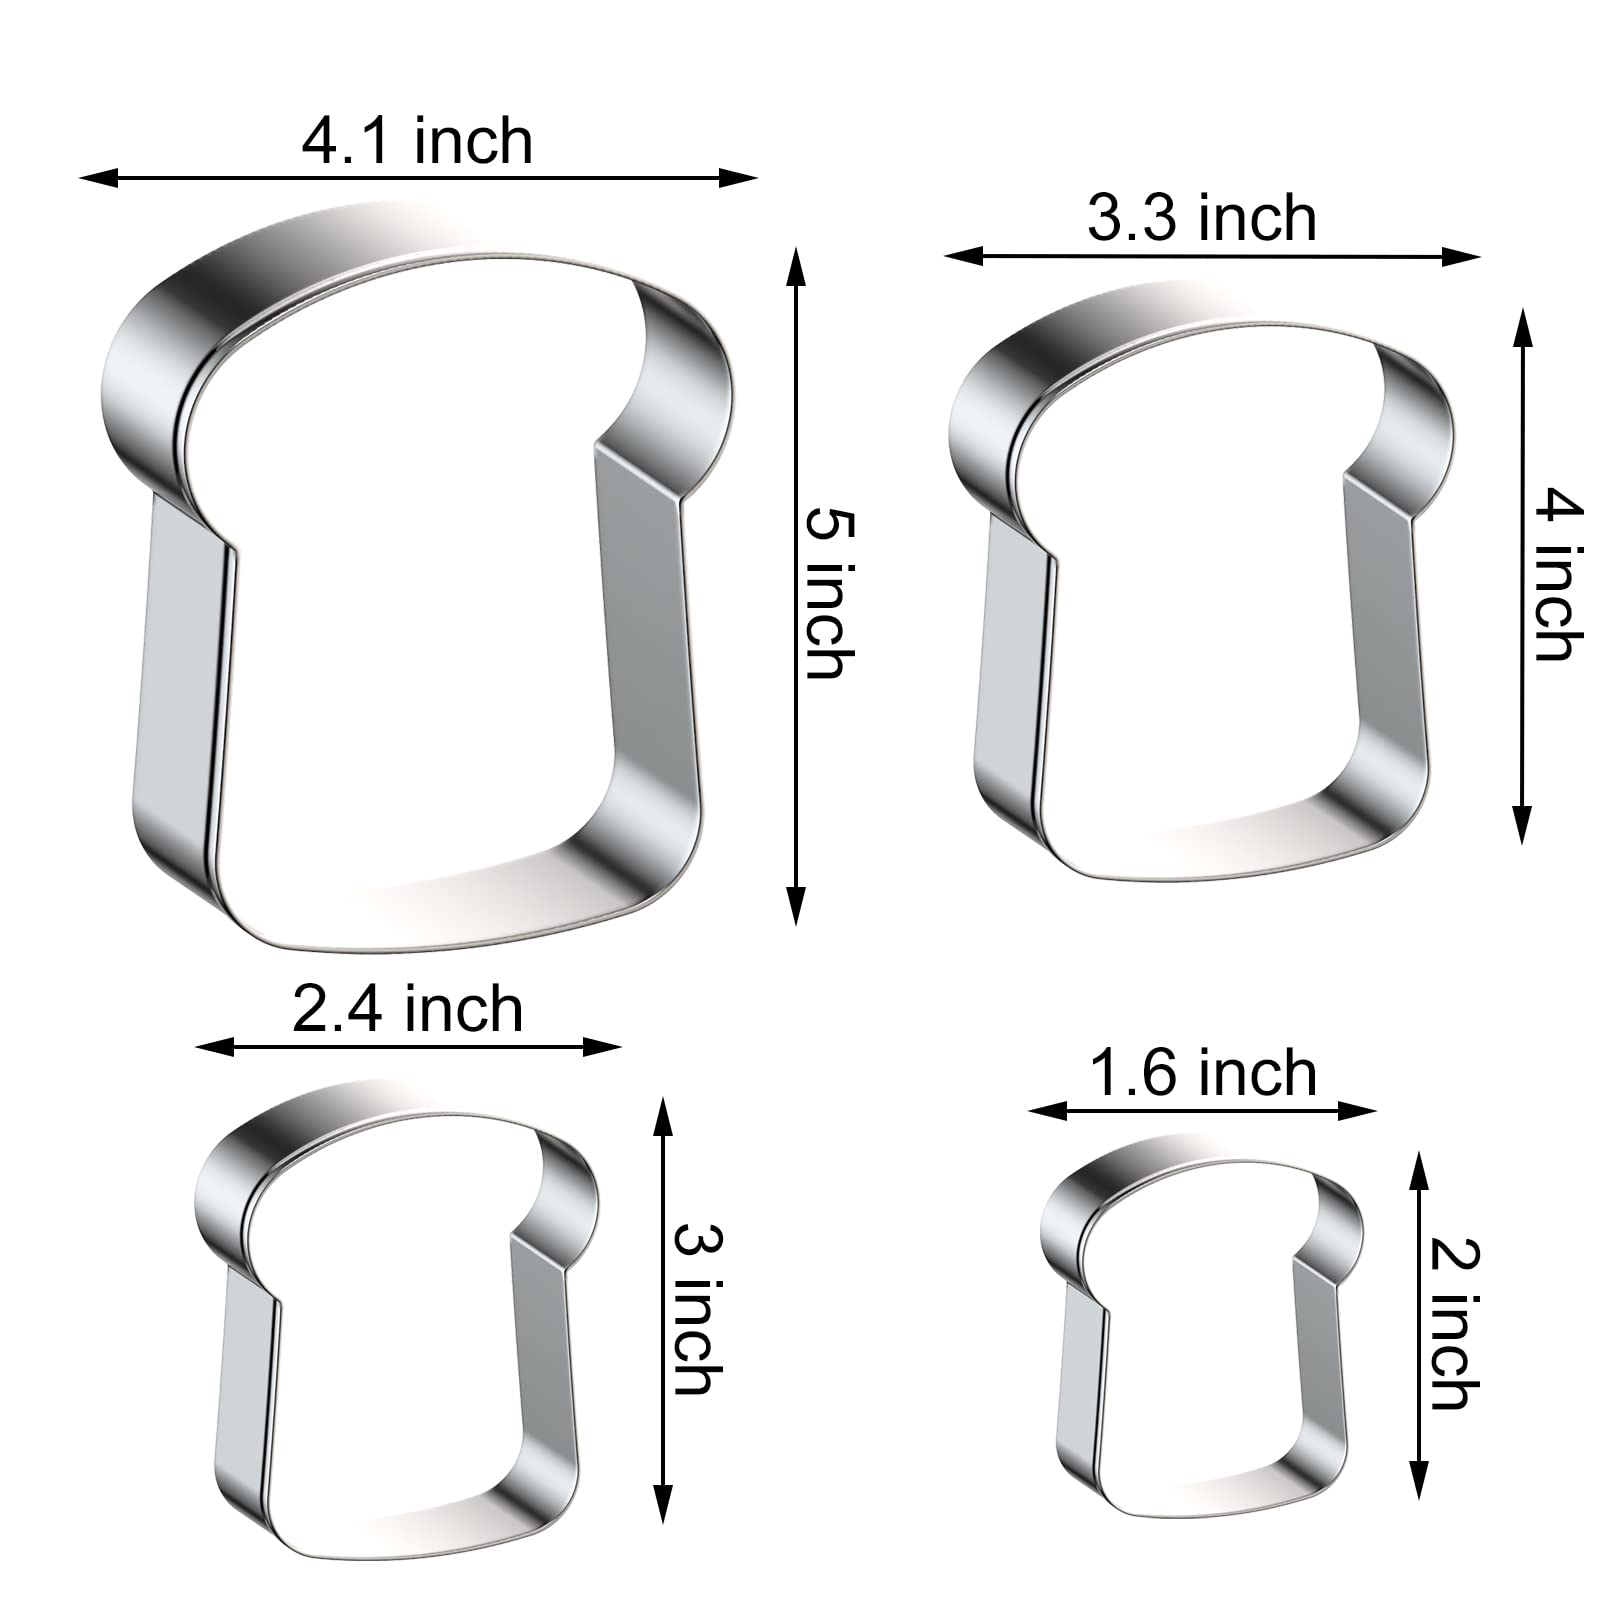 Slice of Bread Cookie Cutter Set - 5", 4", 3", 2" - 4 Piece Toast Food Cookie Cutters Shapes - Stainless Steel